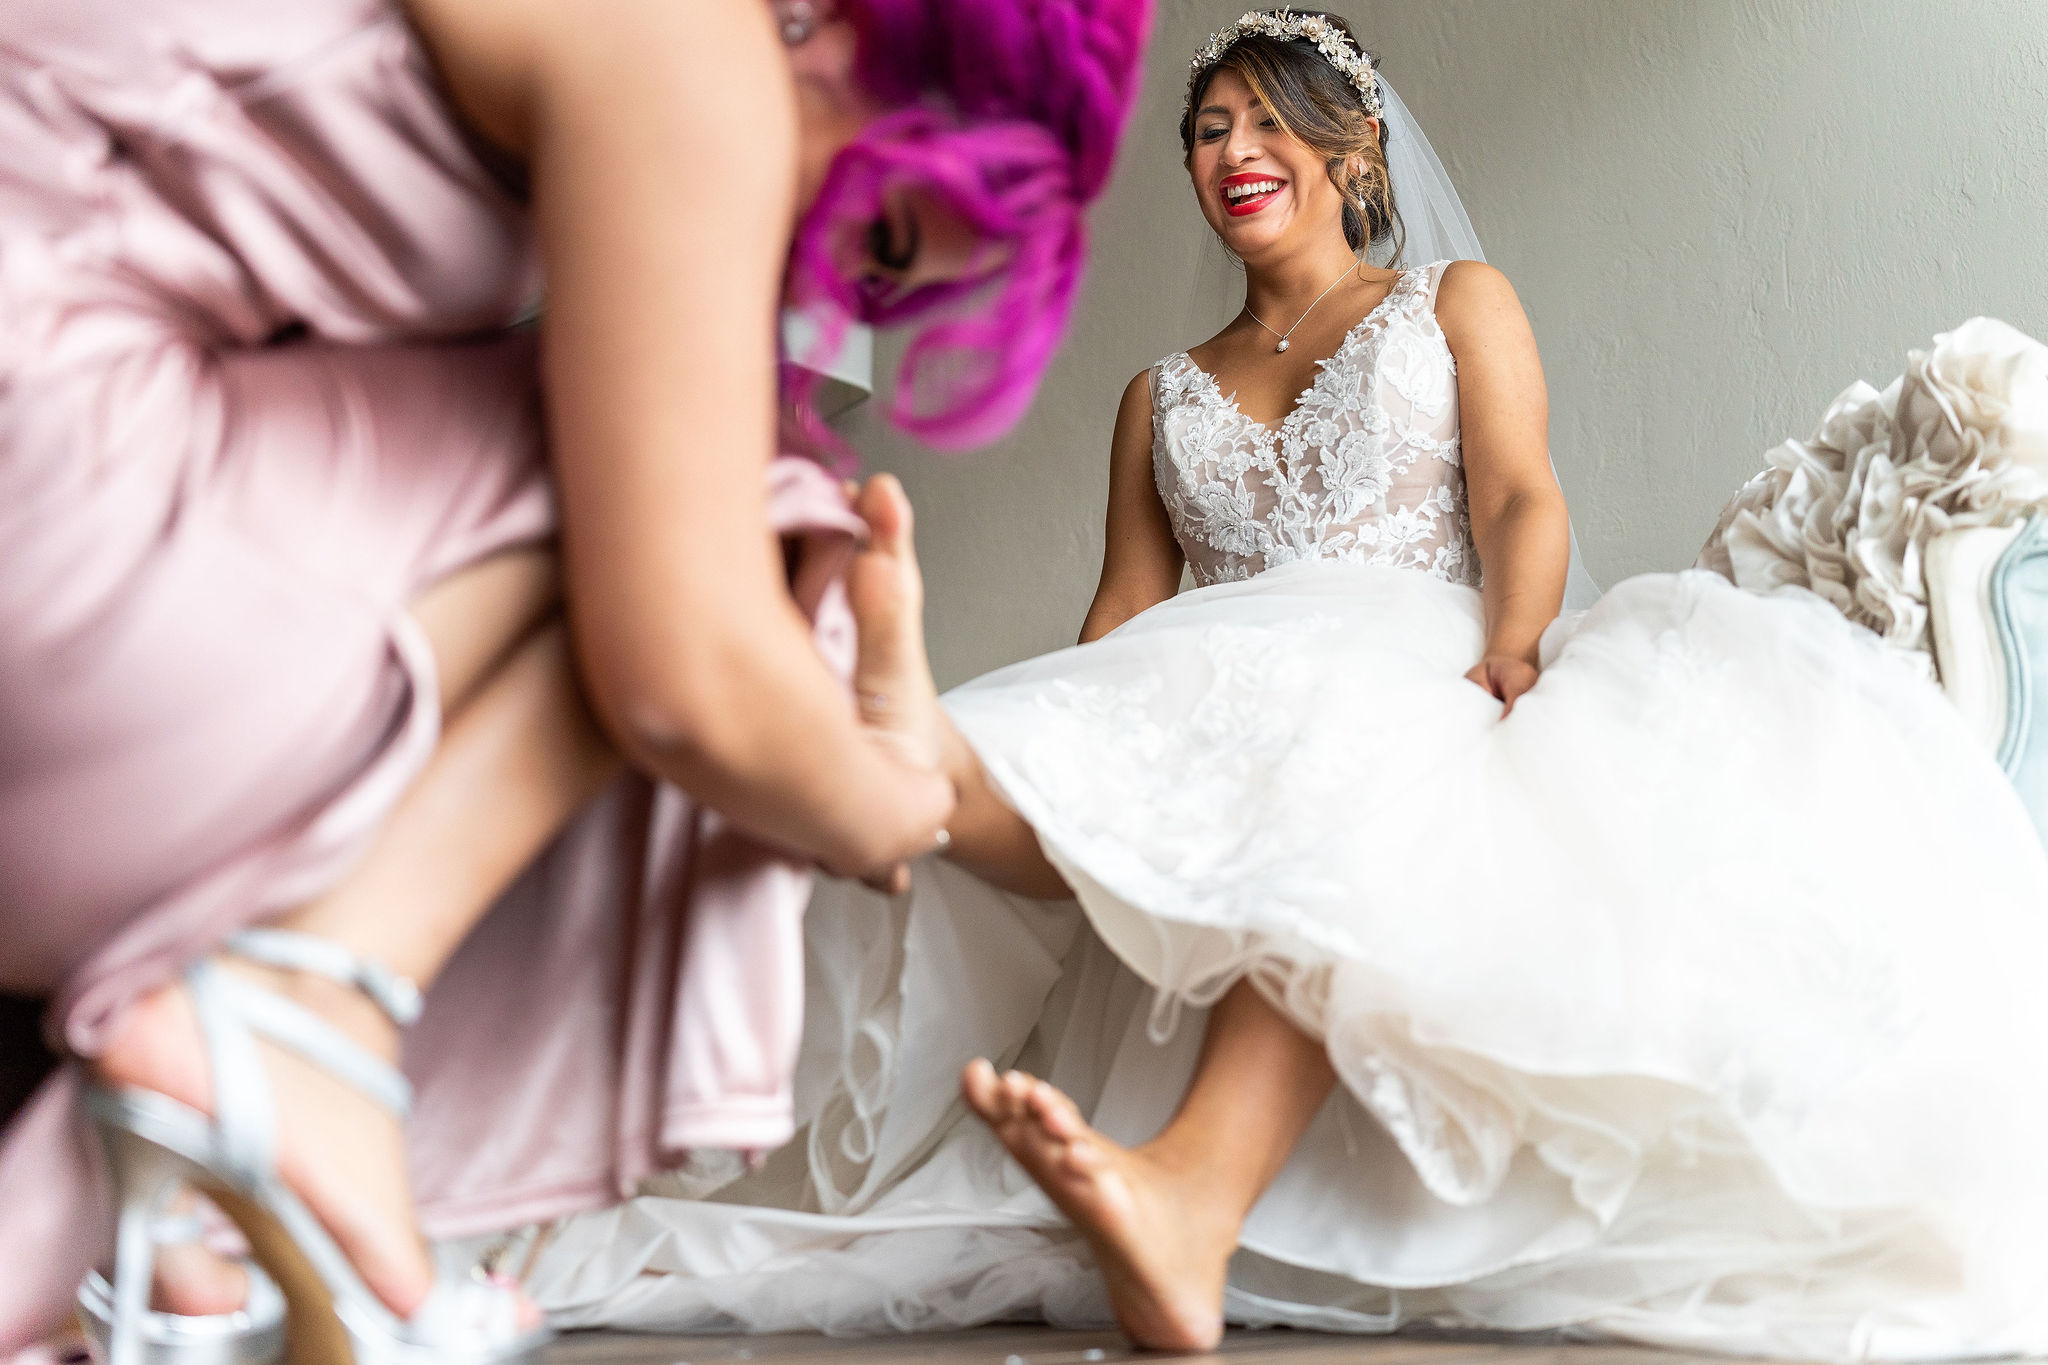 maid of honor helping bride get her shoes on